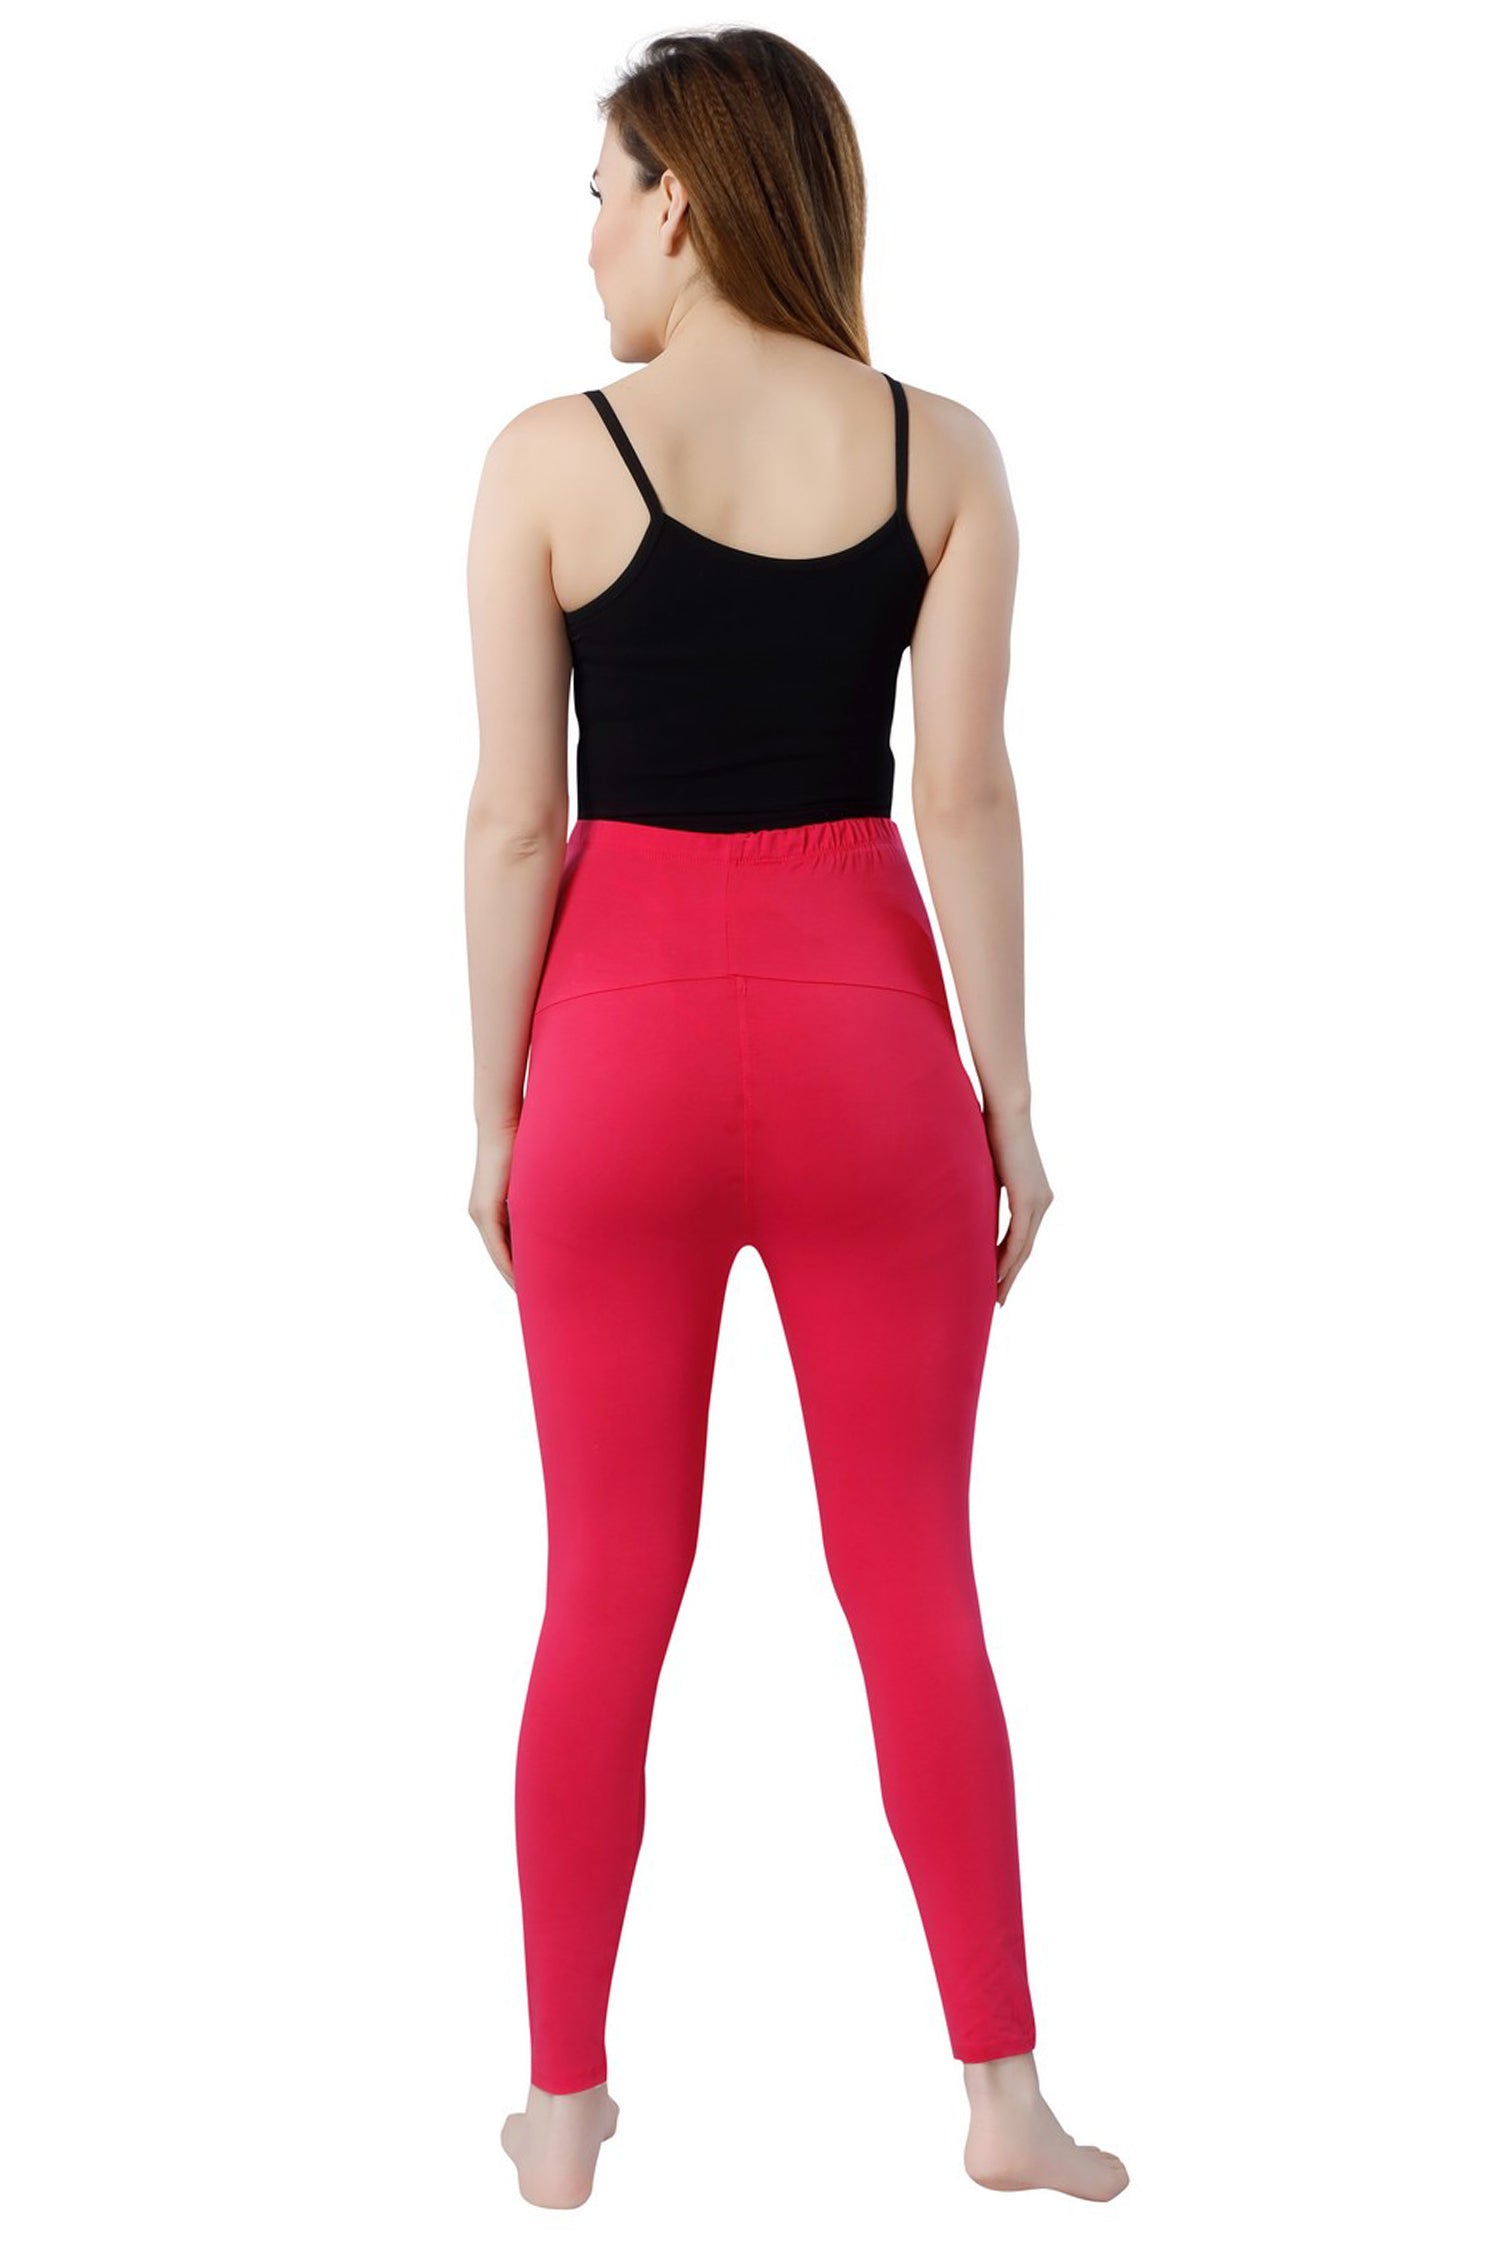 Active Wear | Ajile Cut-Out Detail Cotton Workout Leggings (Tights) Size 30  | Freeup